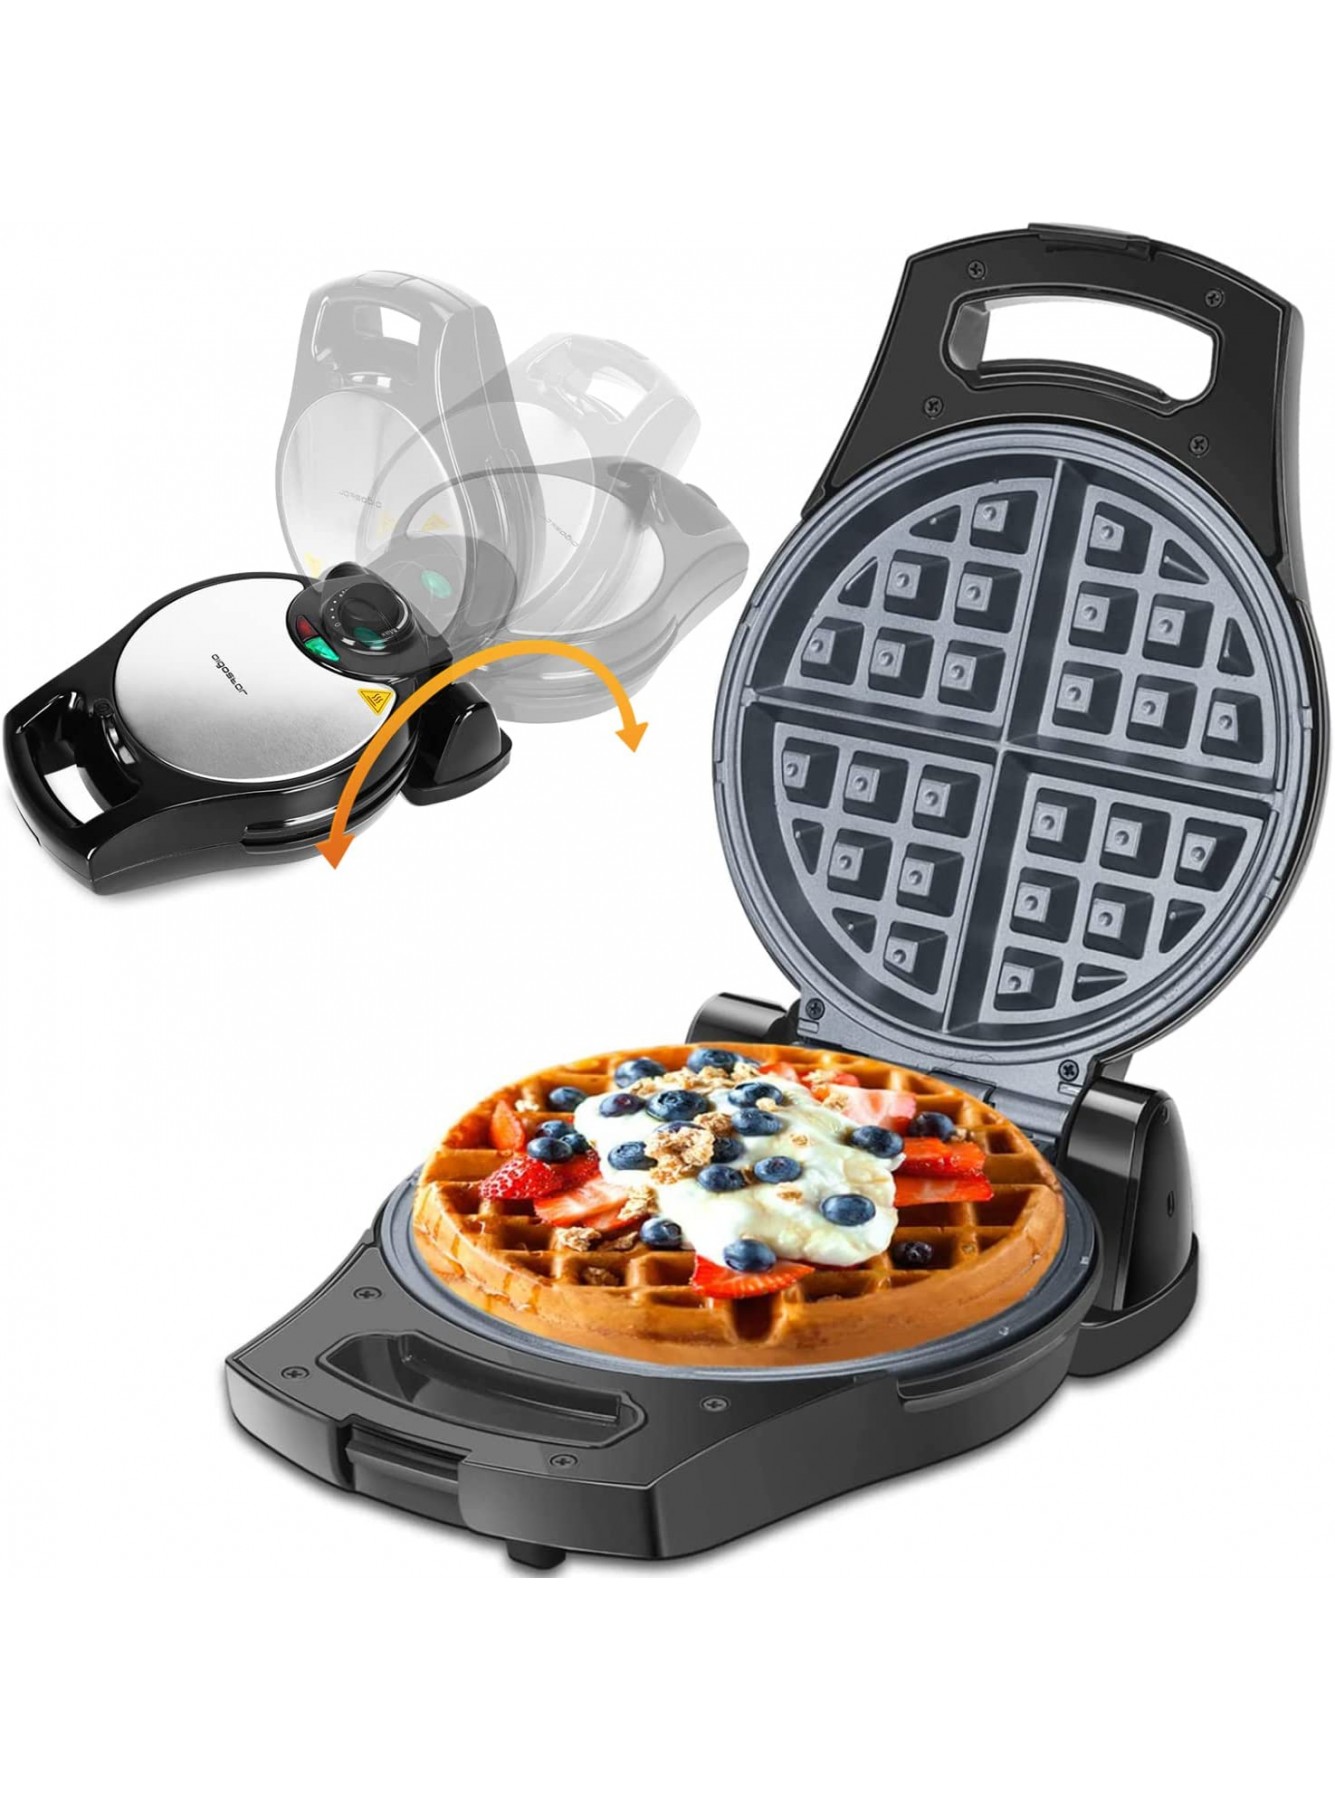 Belgian Waffle Maker 8 Inch Flip Waffle Irons with Non-Stick Surfaces 900W Waffle Makers with Temperature Control 4 Slice Black ETL Certificated Aigostar B082TPWCJP